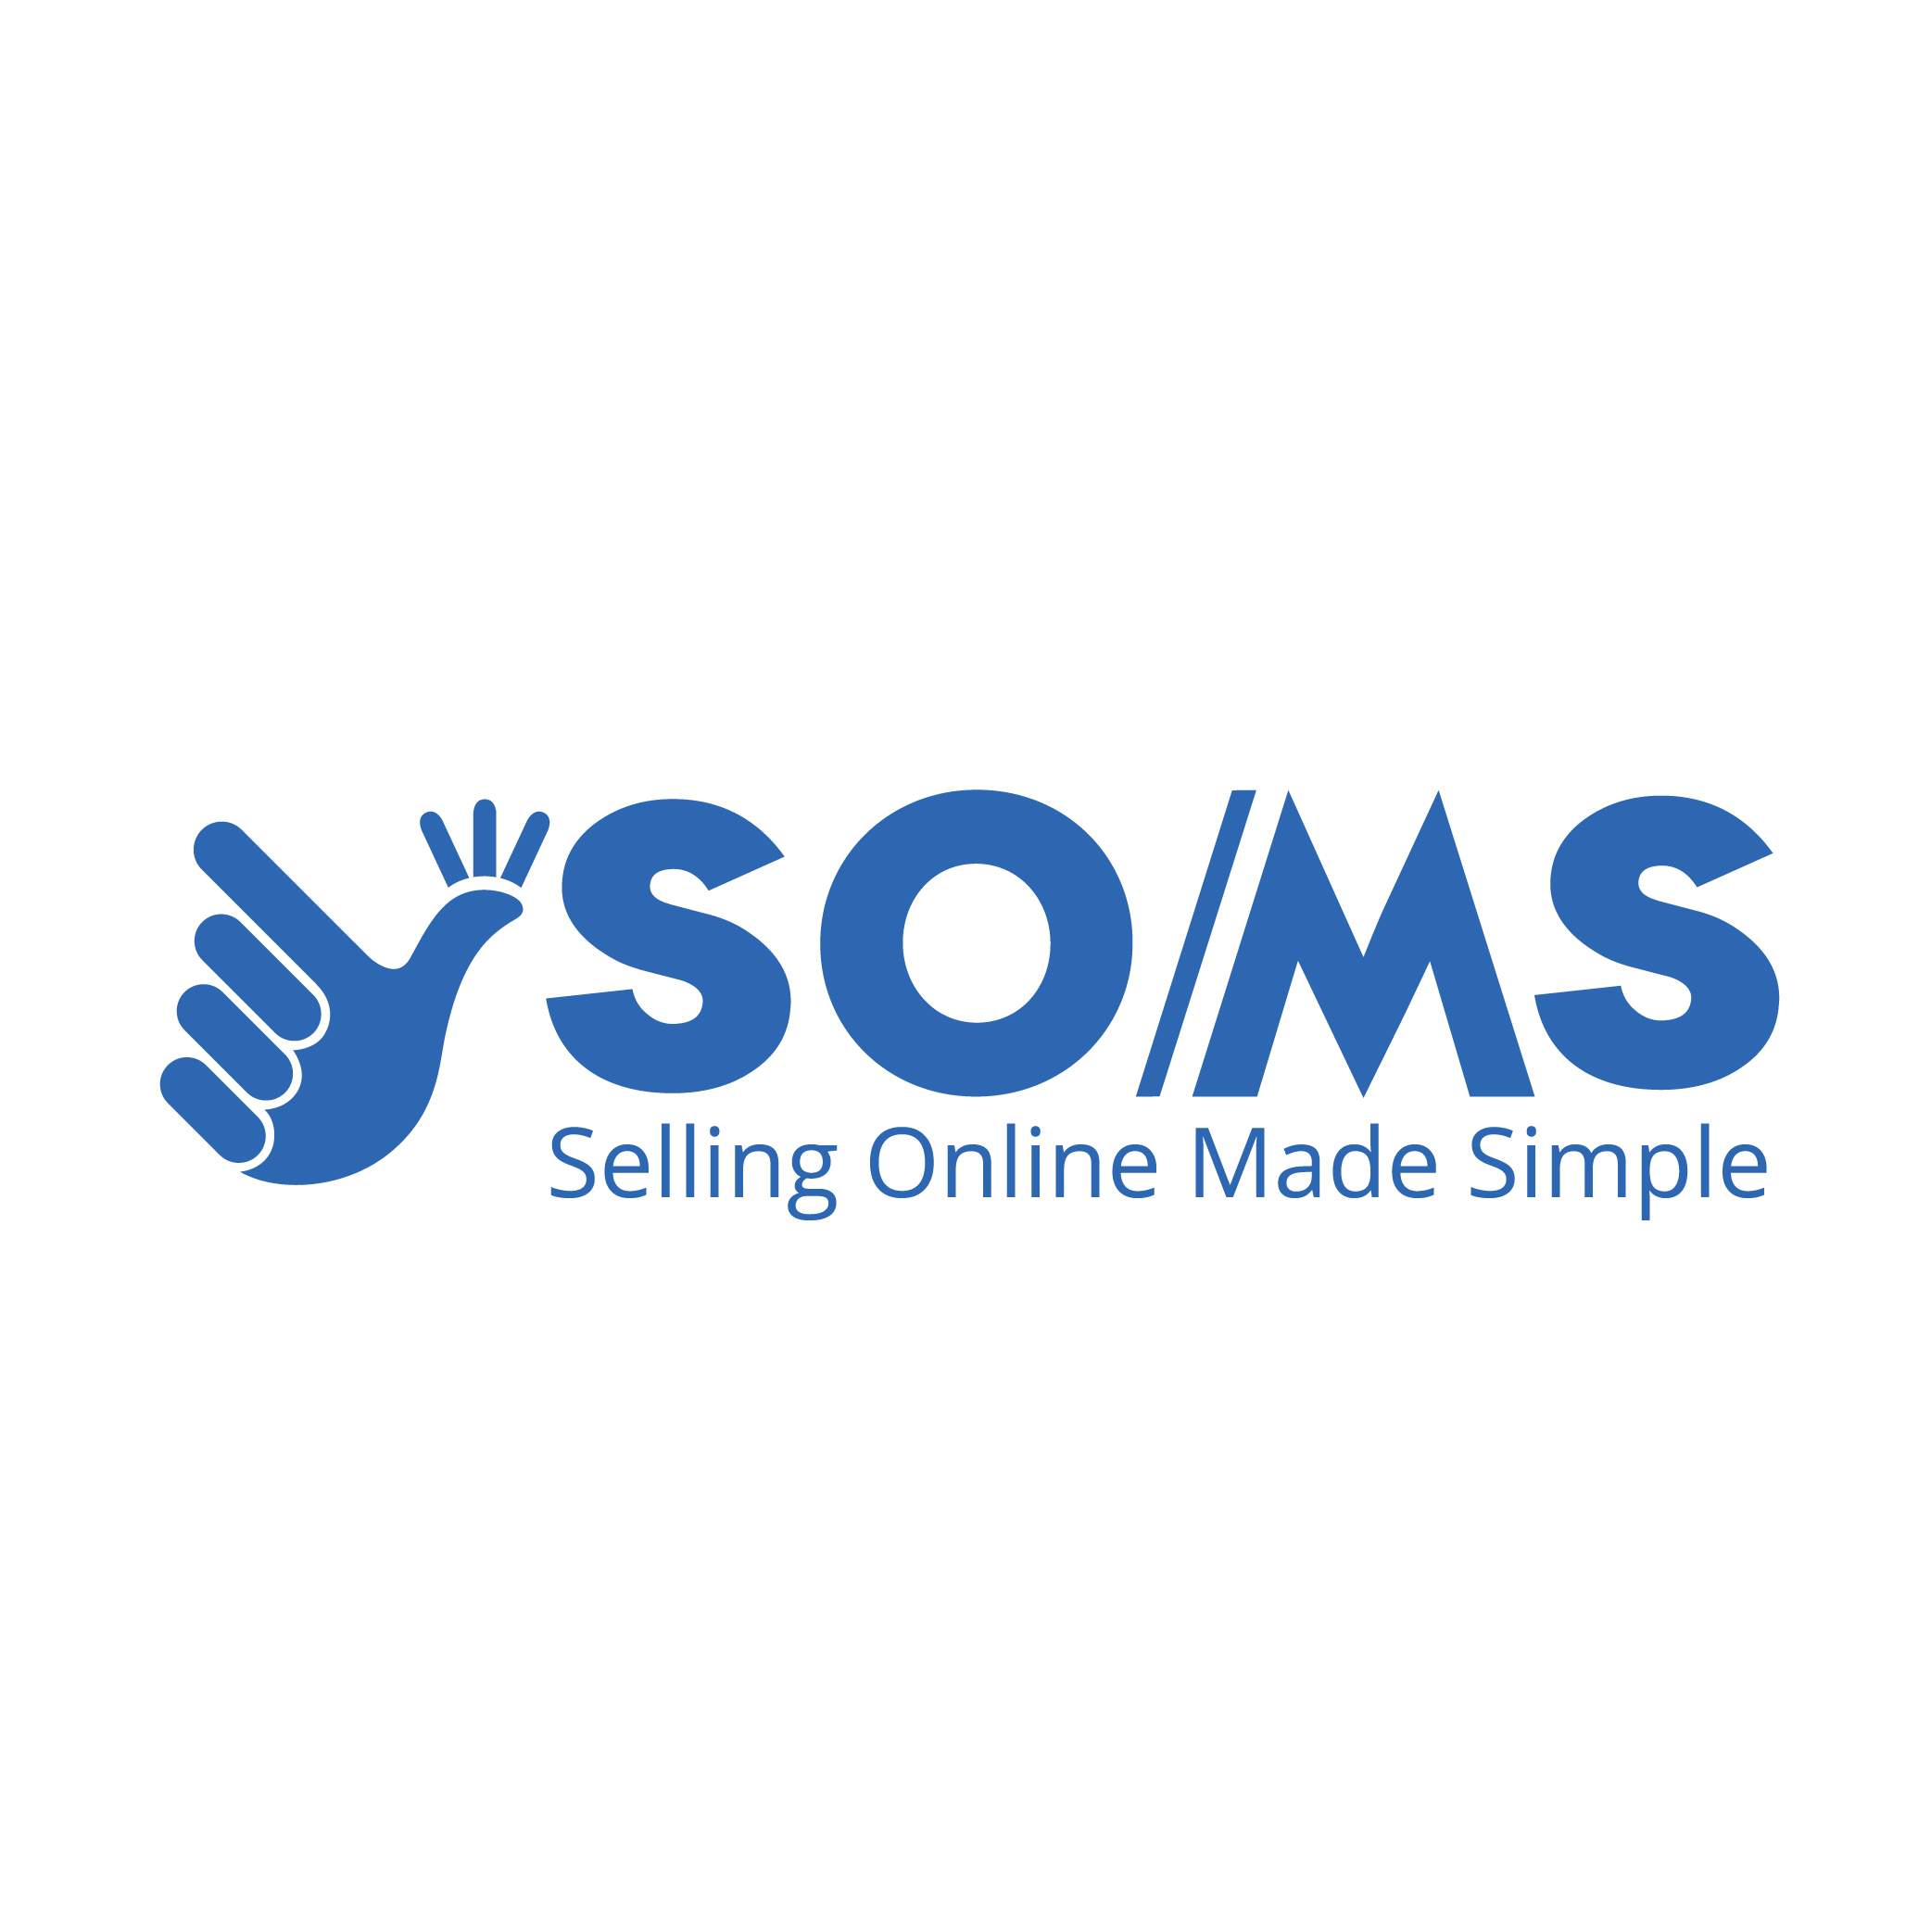 Selling Online Made Simple